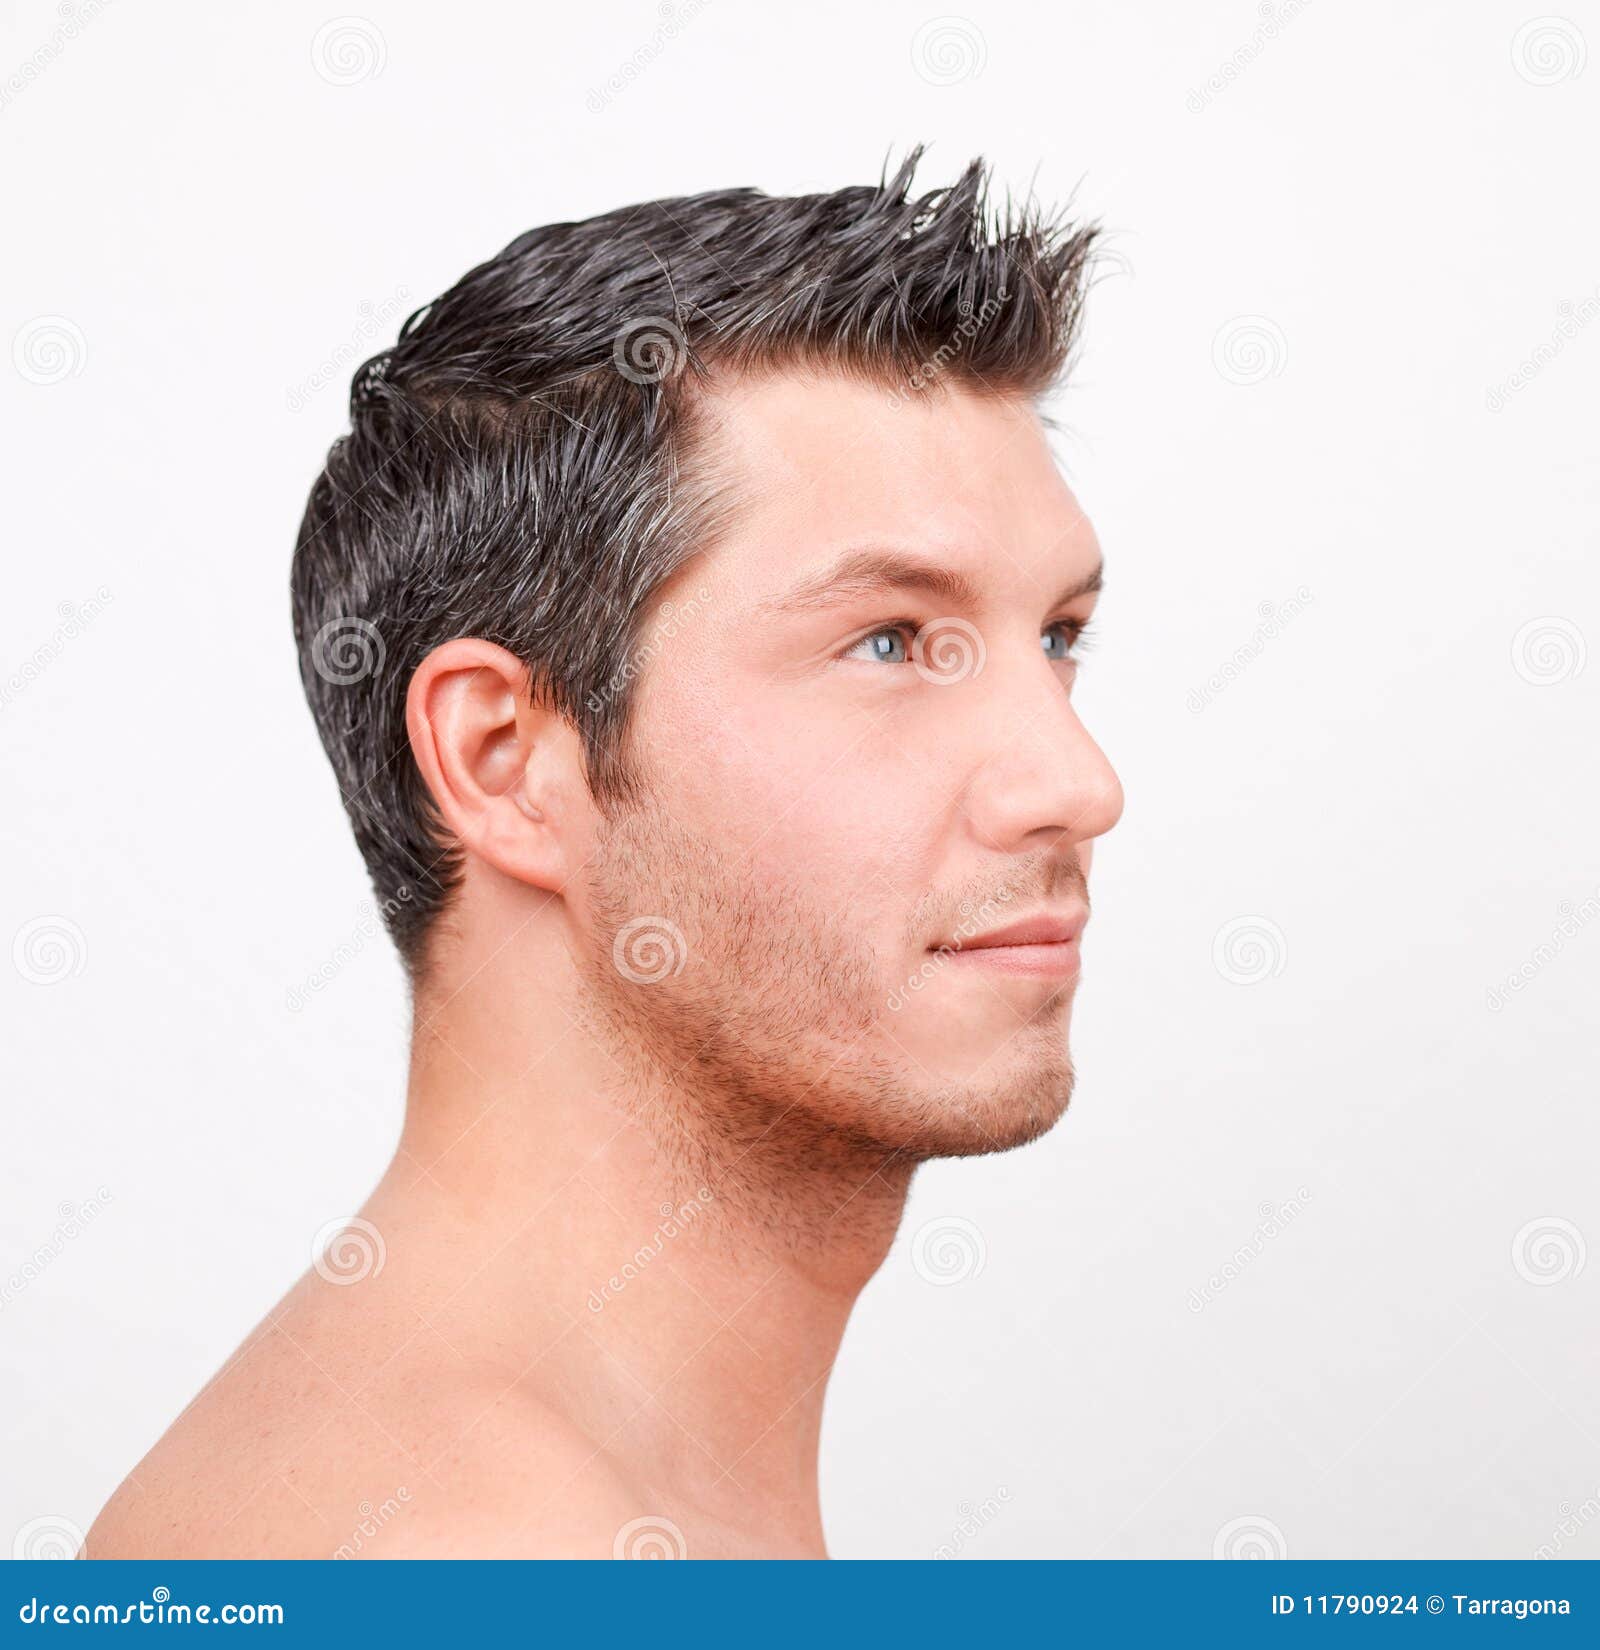 Hair Cut Dress Style Young Adult Man Stock Photo - Image of advertise,  irokese: 11790924